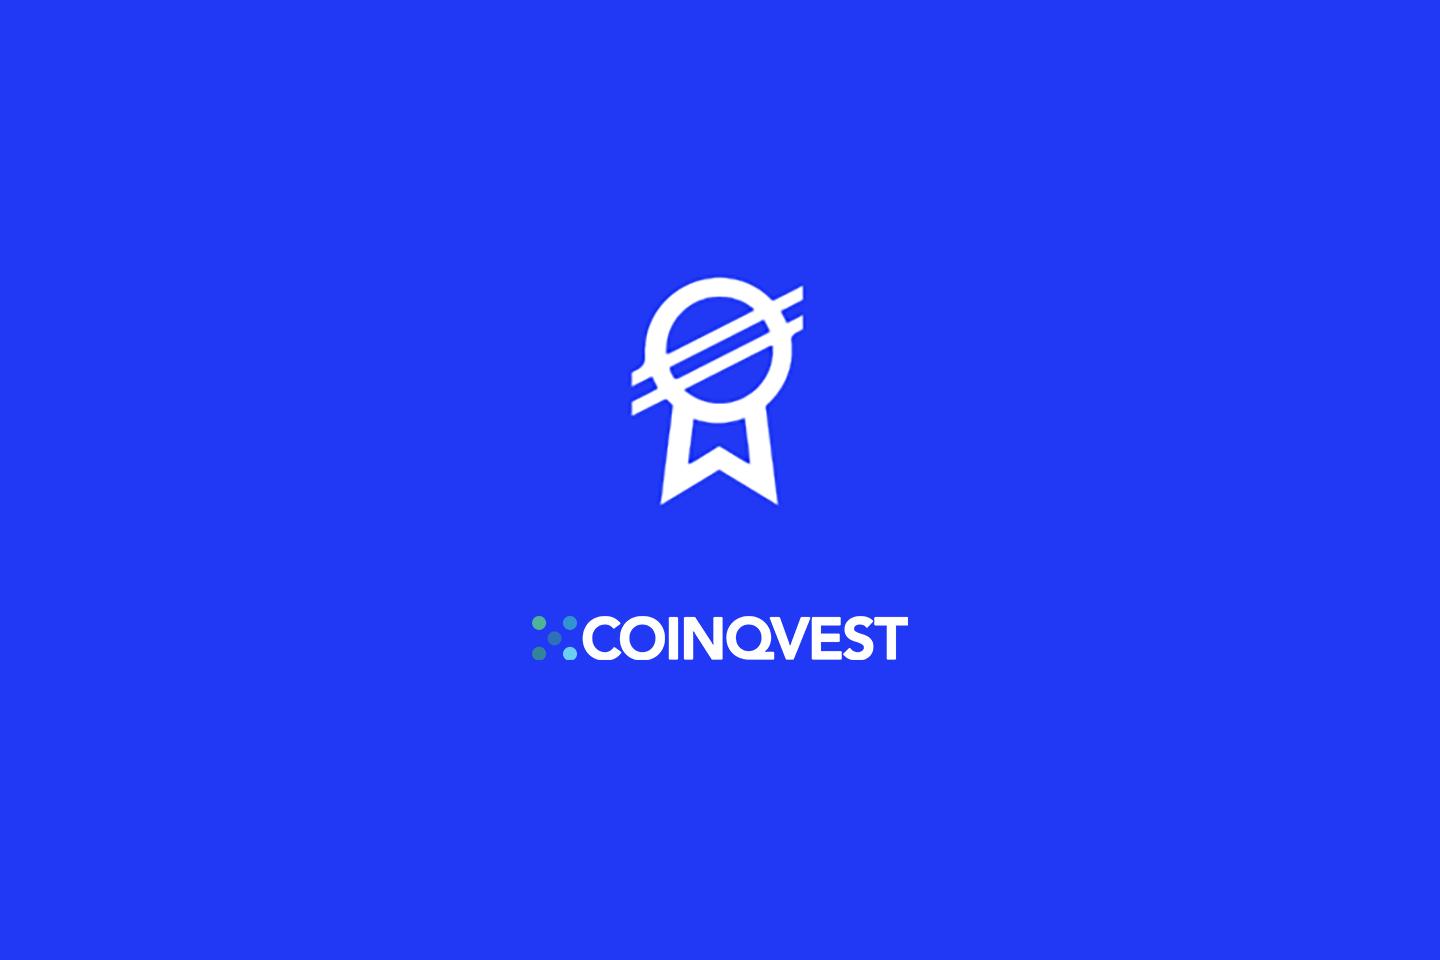 COINQVEST Wins the 4th Round of the Stellar Community Fund